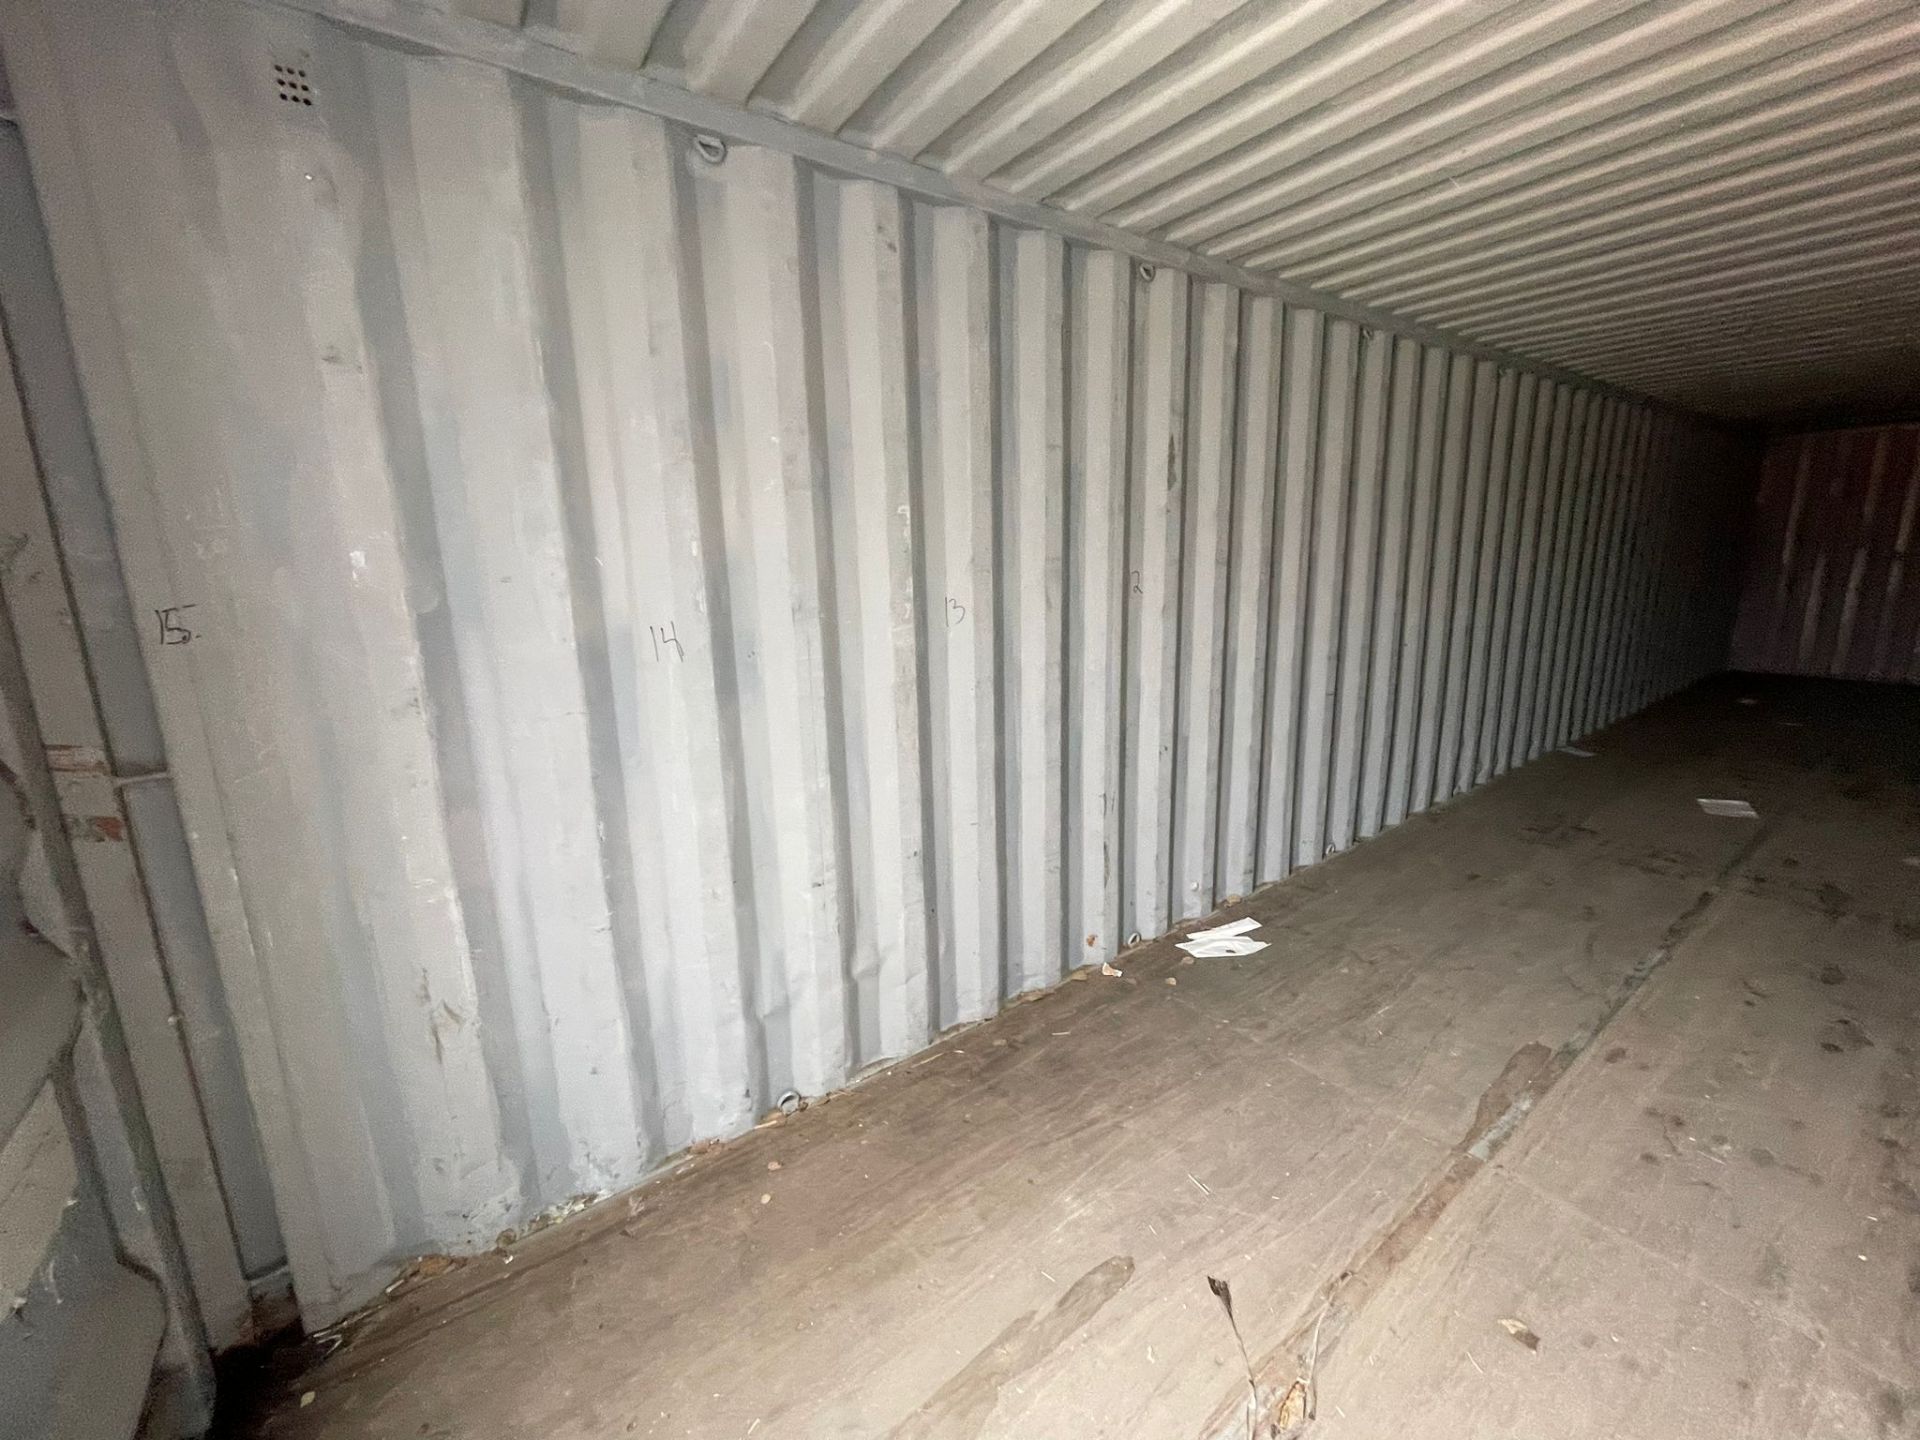 Shipping Container - ref TRLU4627594 - NO RESERVE (40’ GP - Standard) - Image 3 of 4